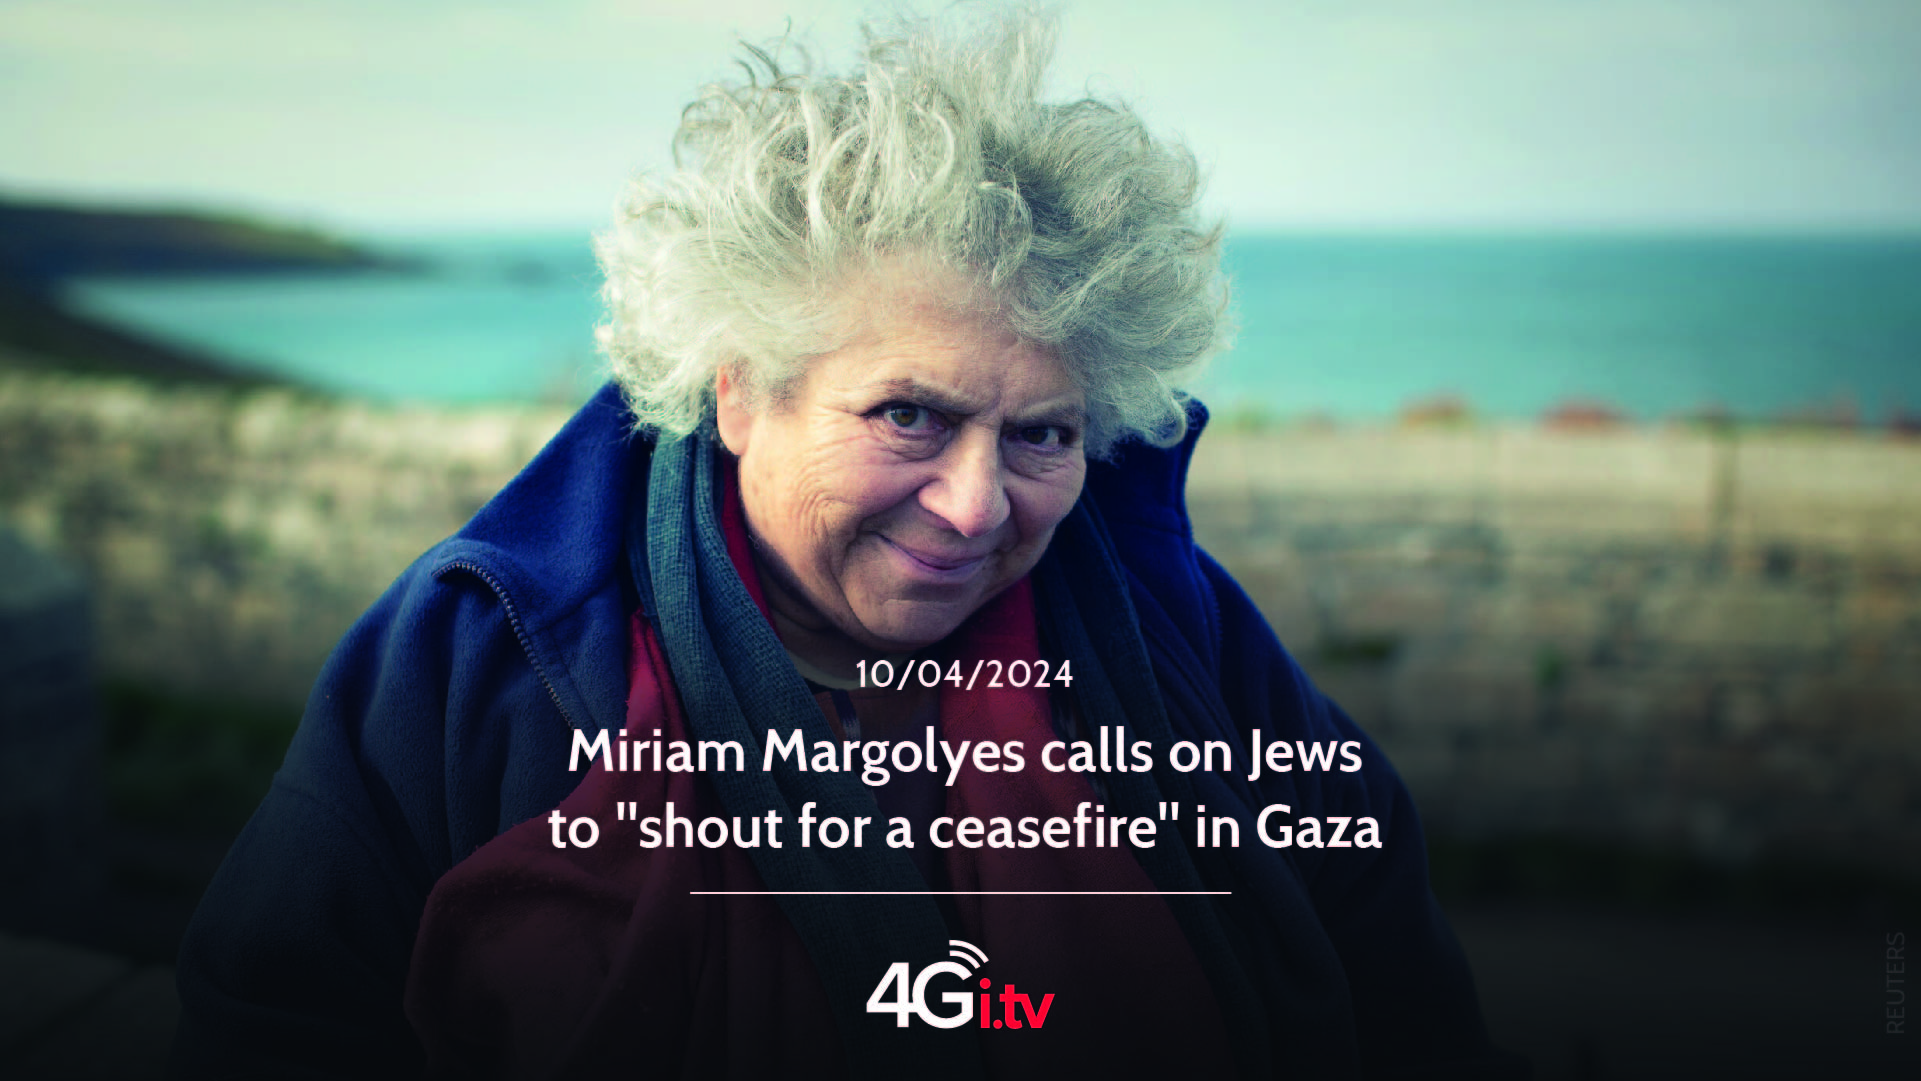 Подробнее о статье Miriam Margolyes calls on Jews to “shout for a ceasefire” in Gaza